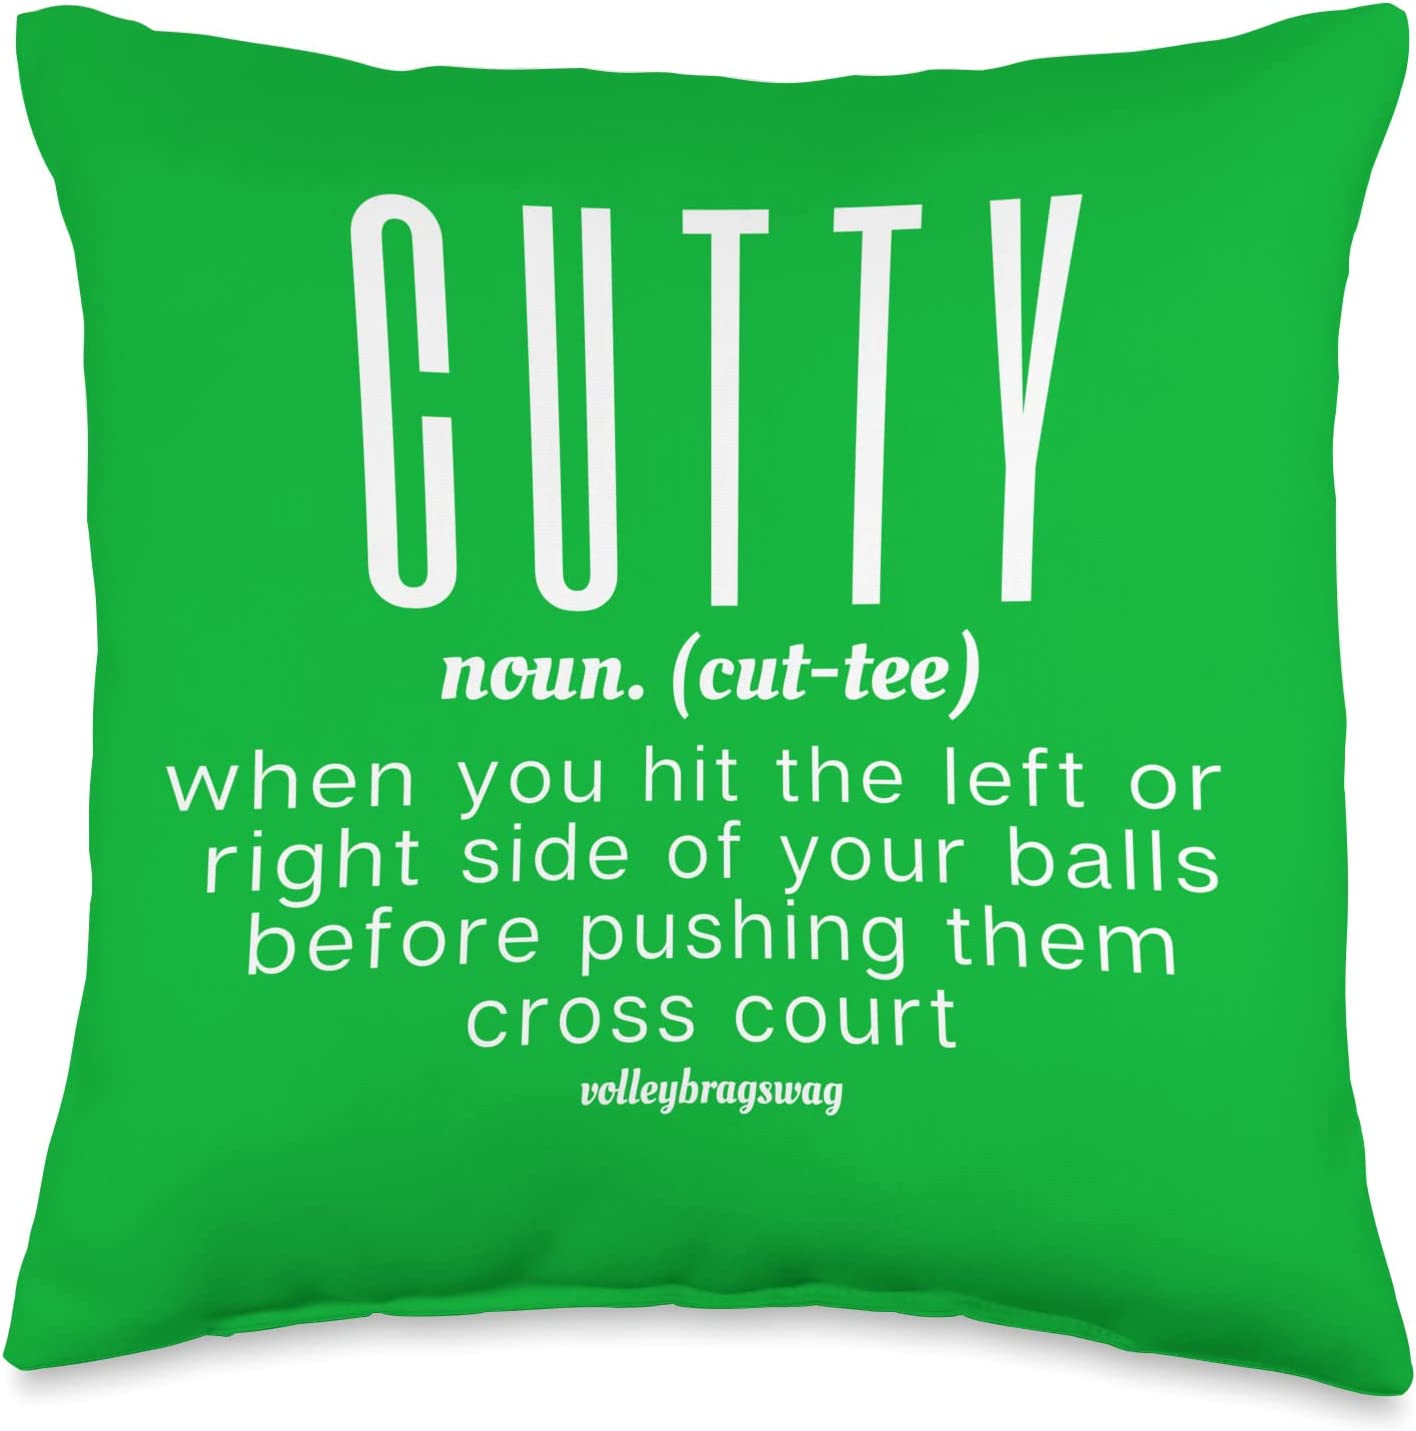 Funny Volleyball Quotes For Hitters by Volleybragswag like CUTTY - When you hit the left or right side of your balls before pushing them cross court.